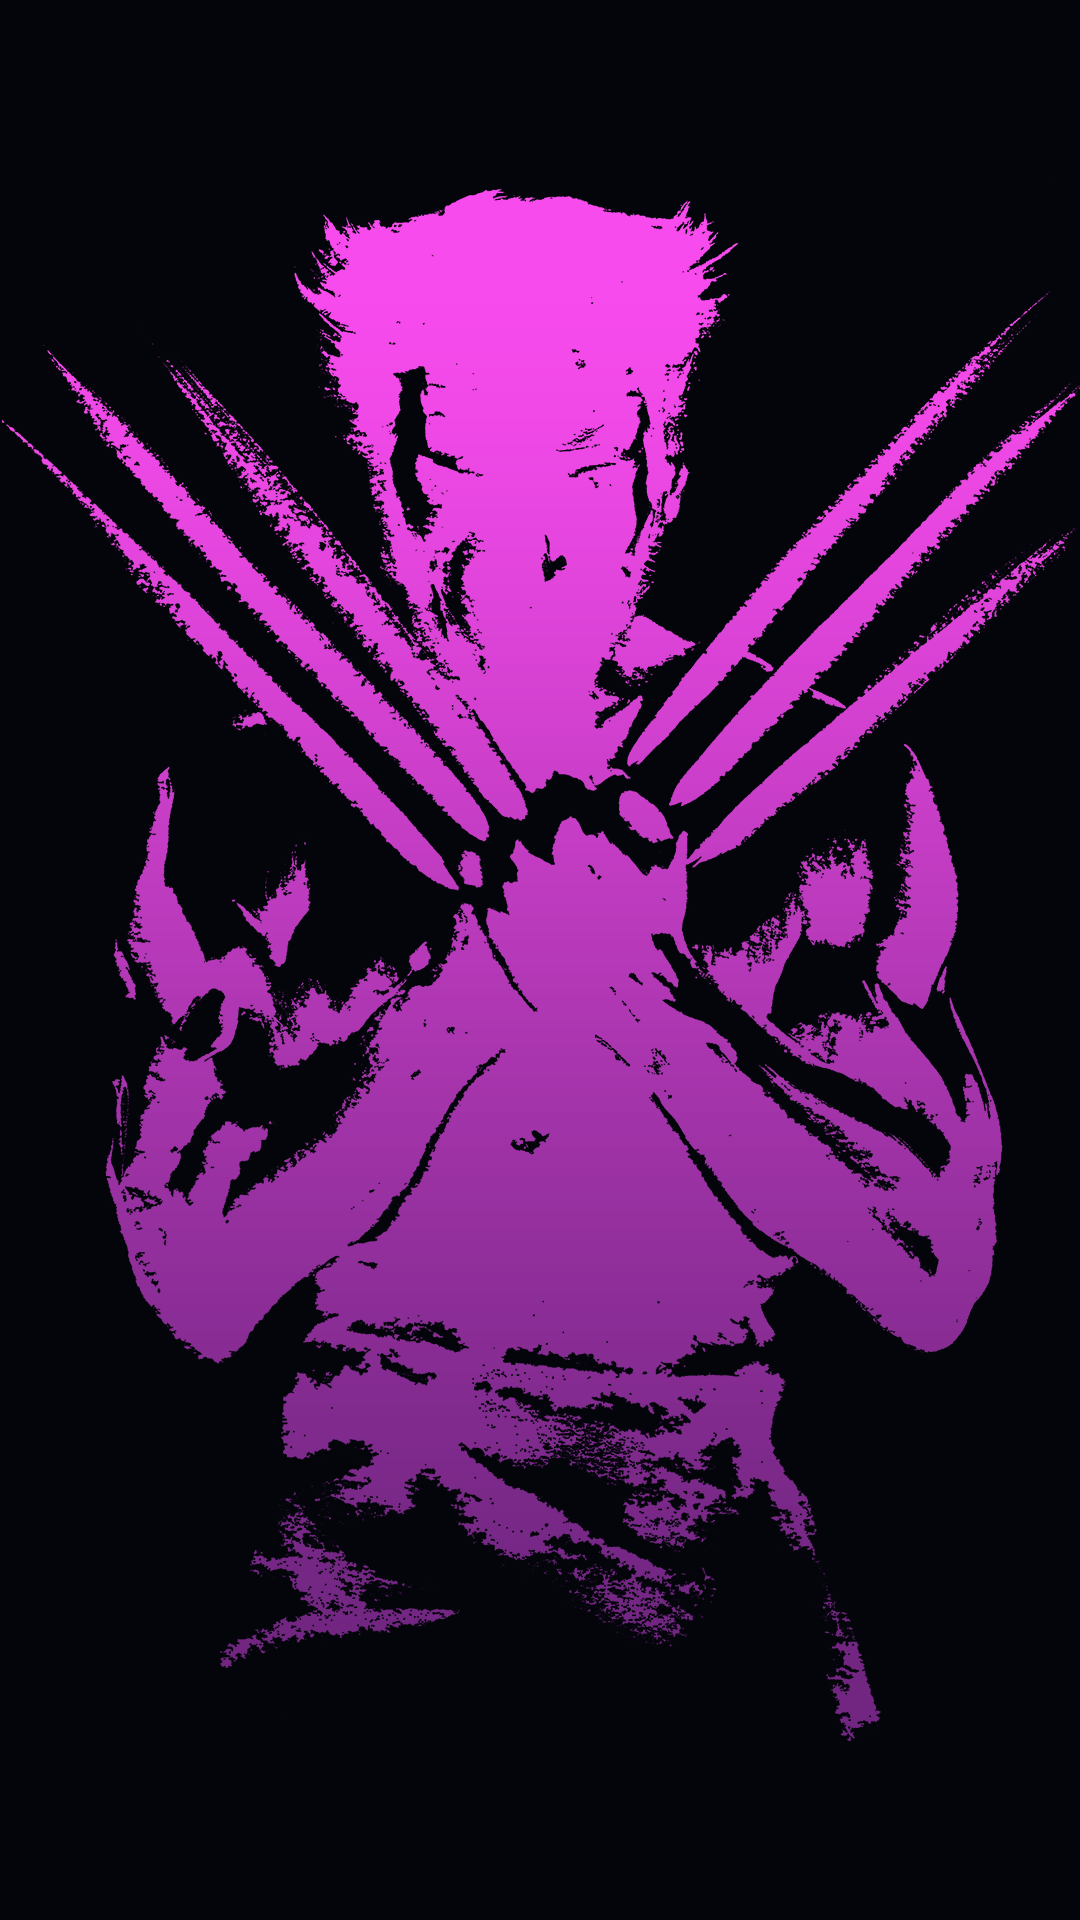 wolverine wallpaper for android,purple,t shirt,graphic design,illustration,fictional character